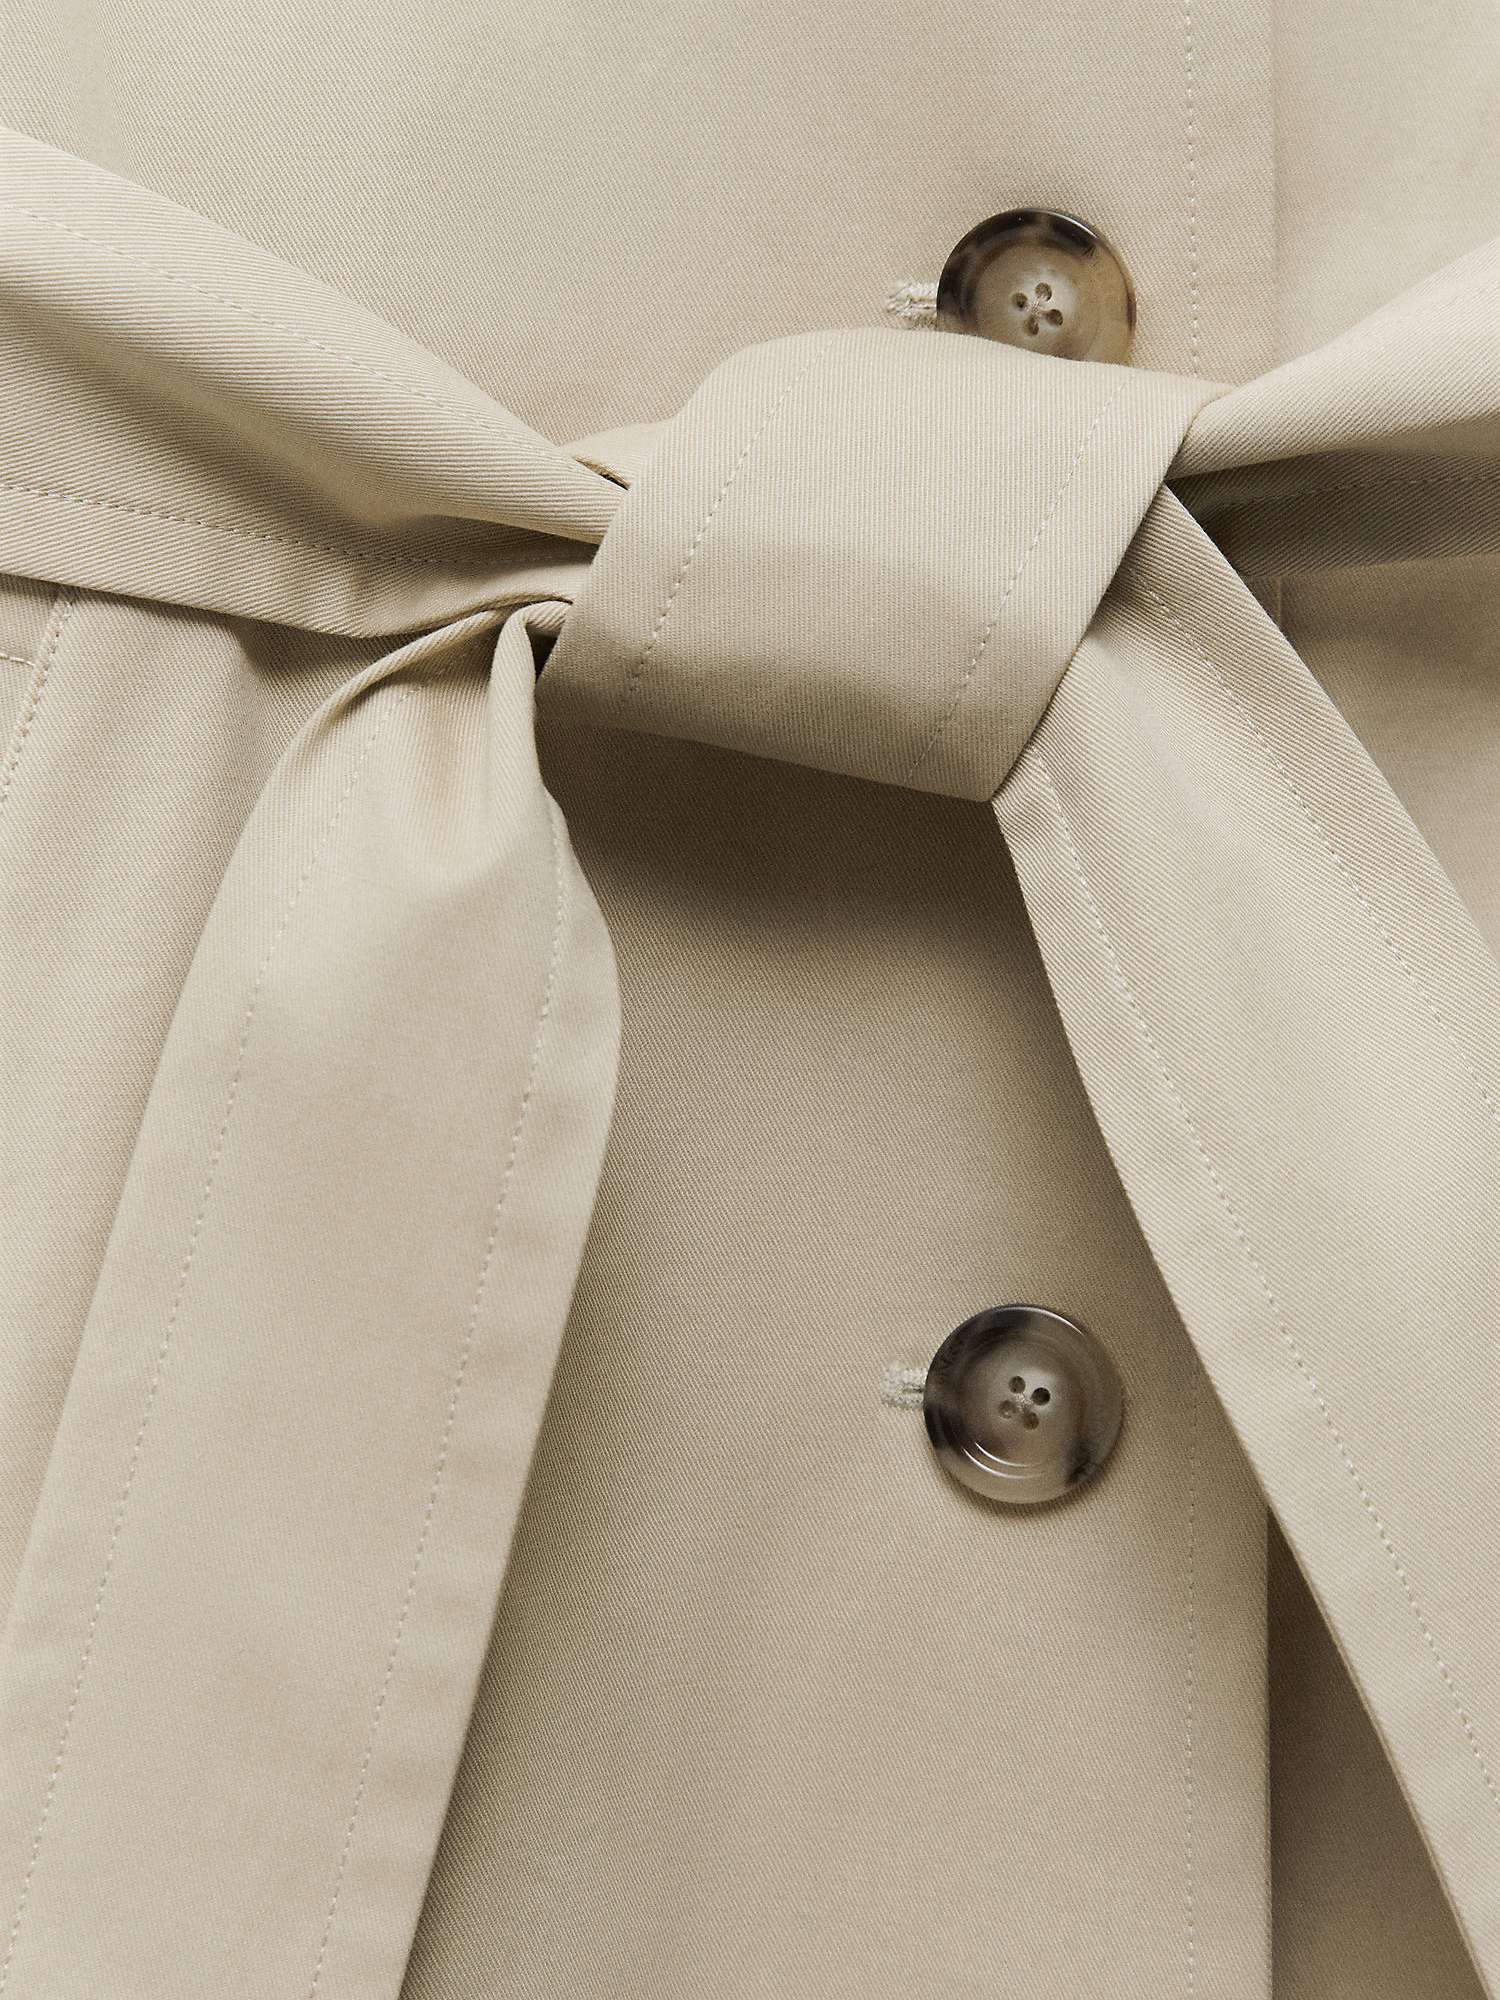 Buy Mango Candy Cotton Trench, Light Beige Online at johnlewis.com